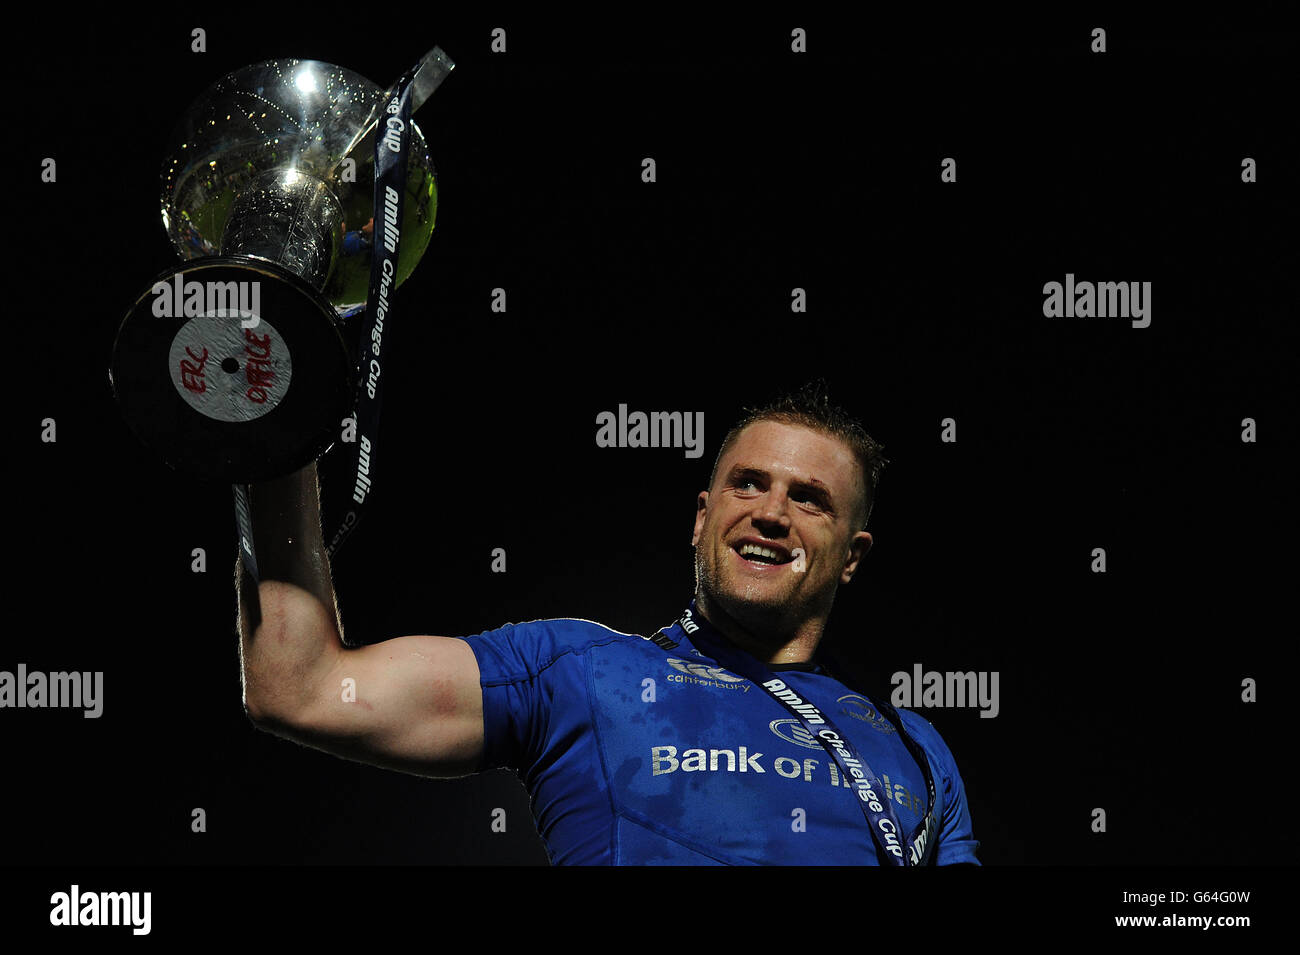 Leinster's Jamie Heaslip celebrates beating Stade Francais during the Amlin Challenge Cup Final match at the RDS, Dublin. PRESS ASSOCATION Photo. Picture date: Friday May 17, 2013. See PA story RUGBYU Cup. Photo credit should read: Artur Widak/PA Wire Stock Photo